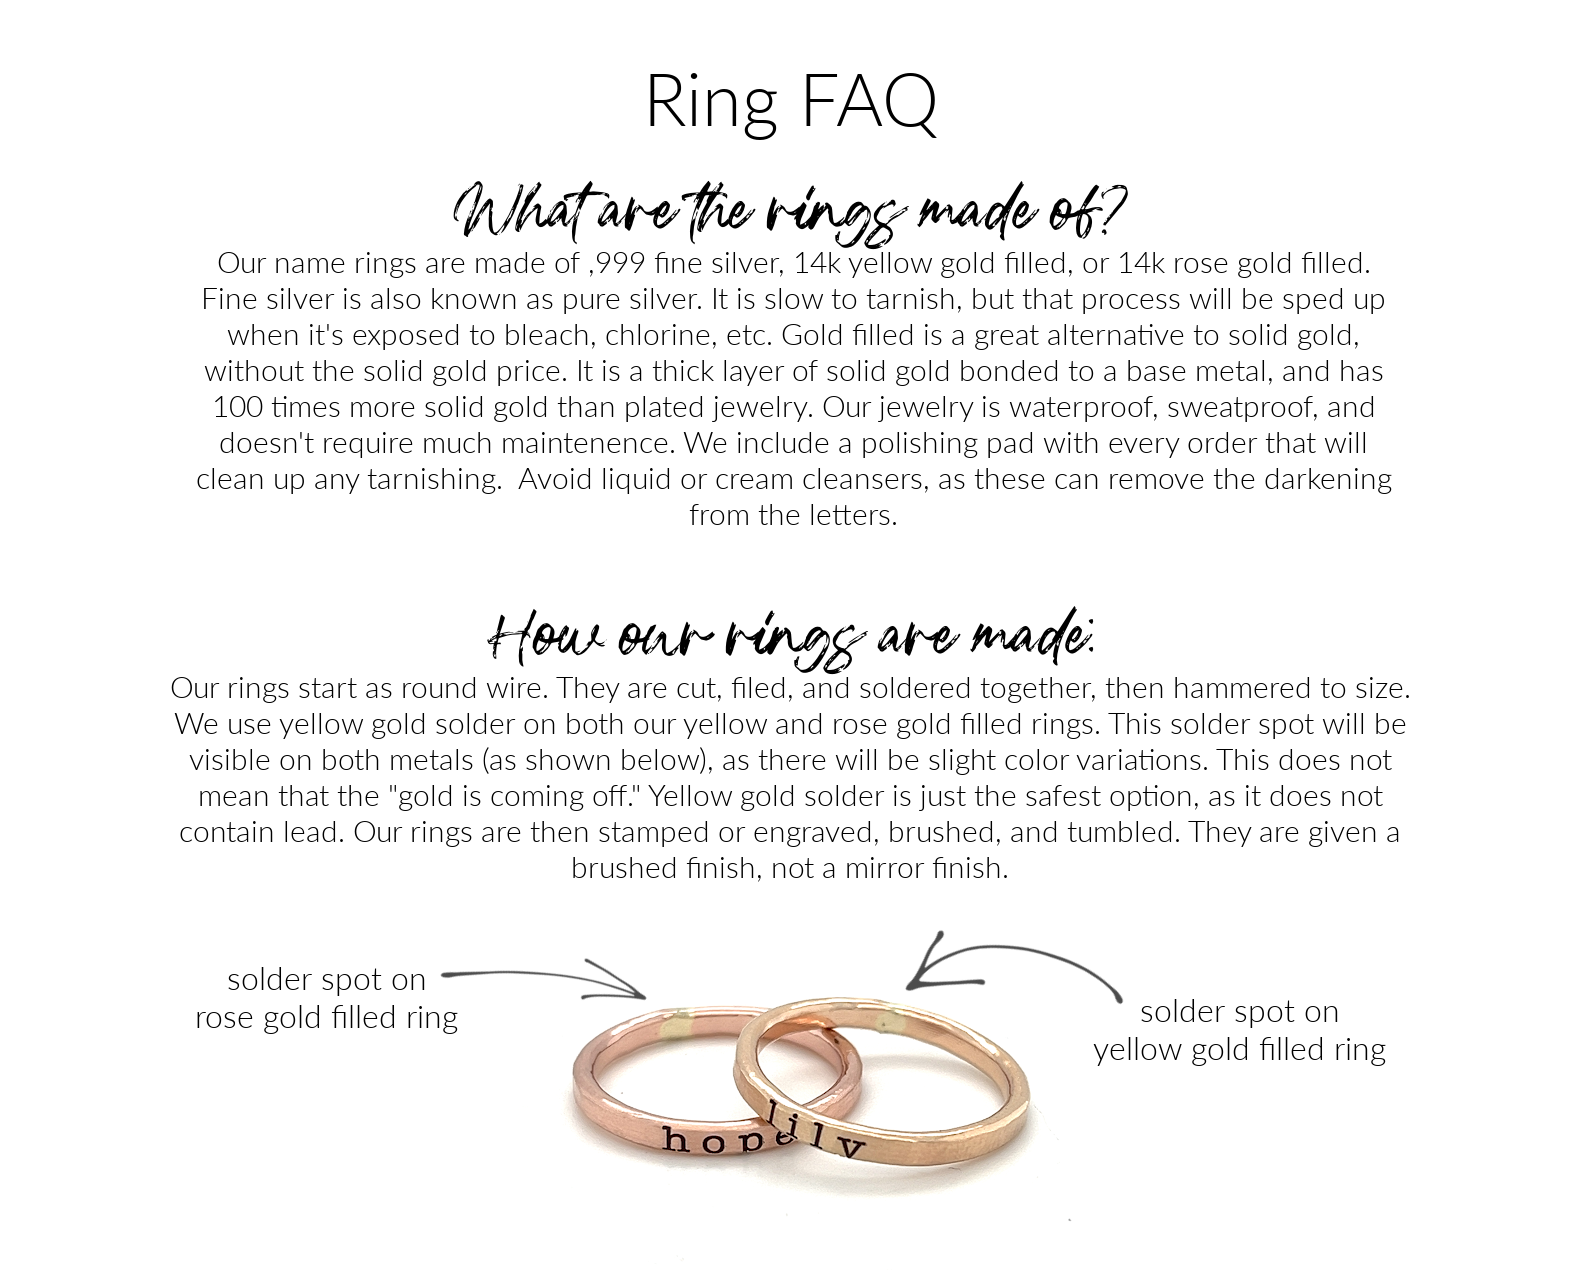 BFF Stacking Ring - Going Golden